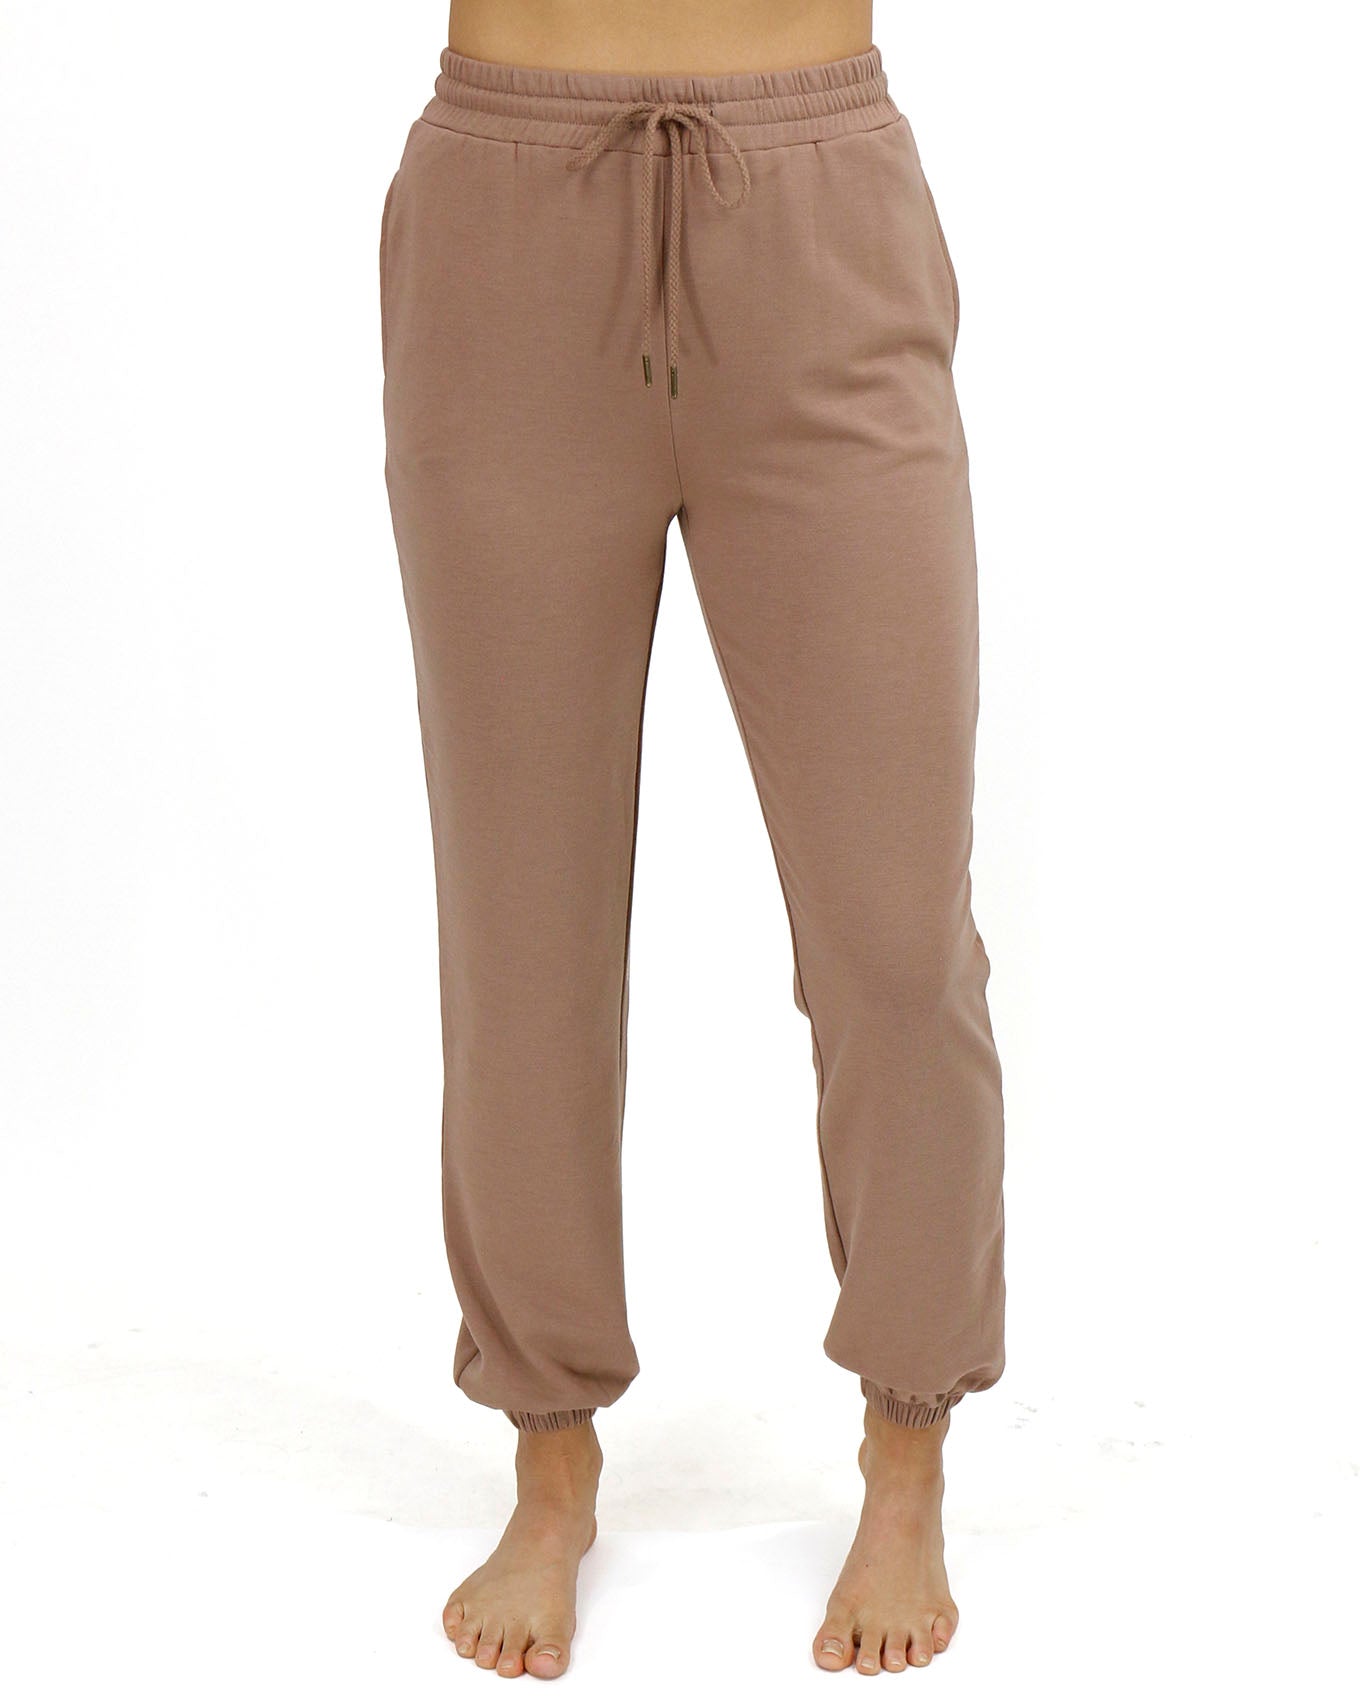 Signature Soft Toffee Sweatpants - FINAL SALE - Grace and Lace